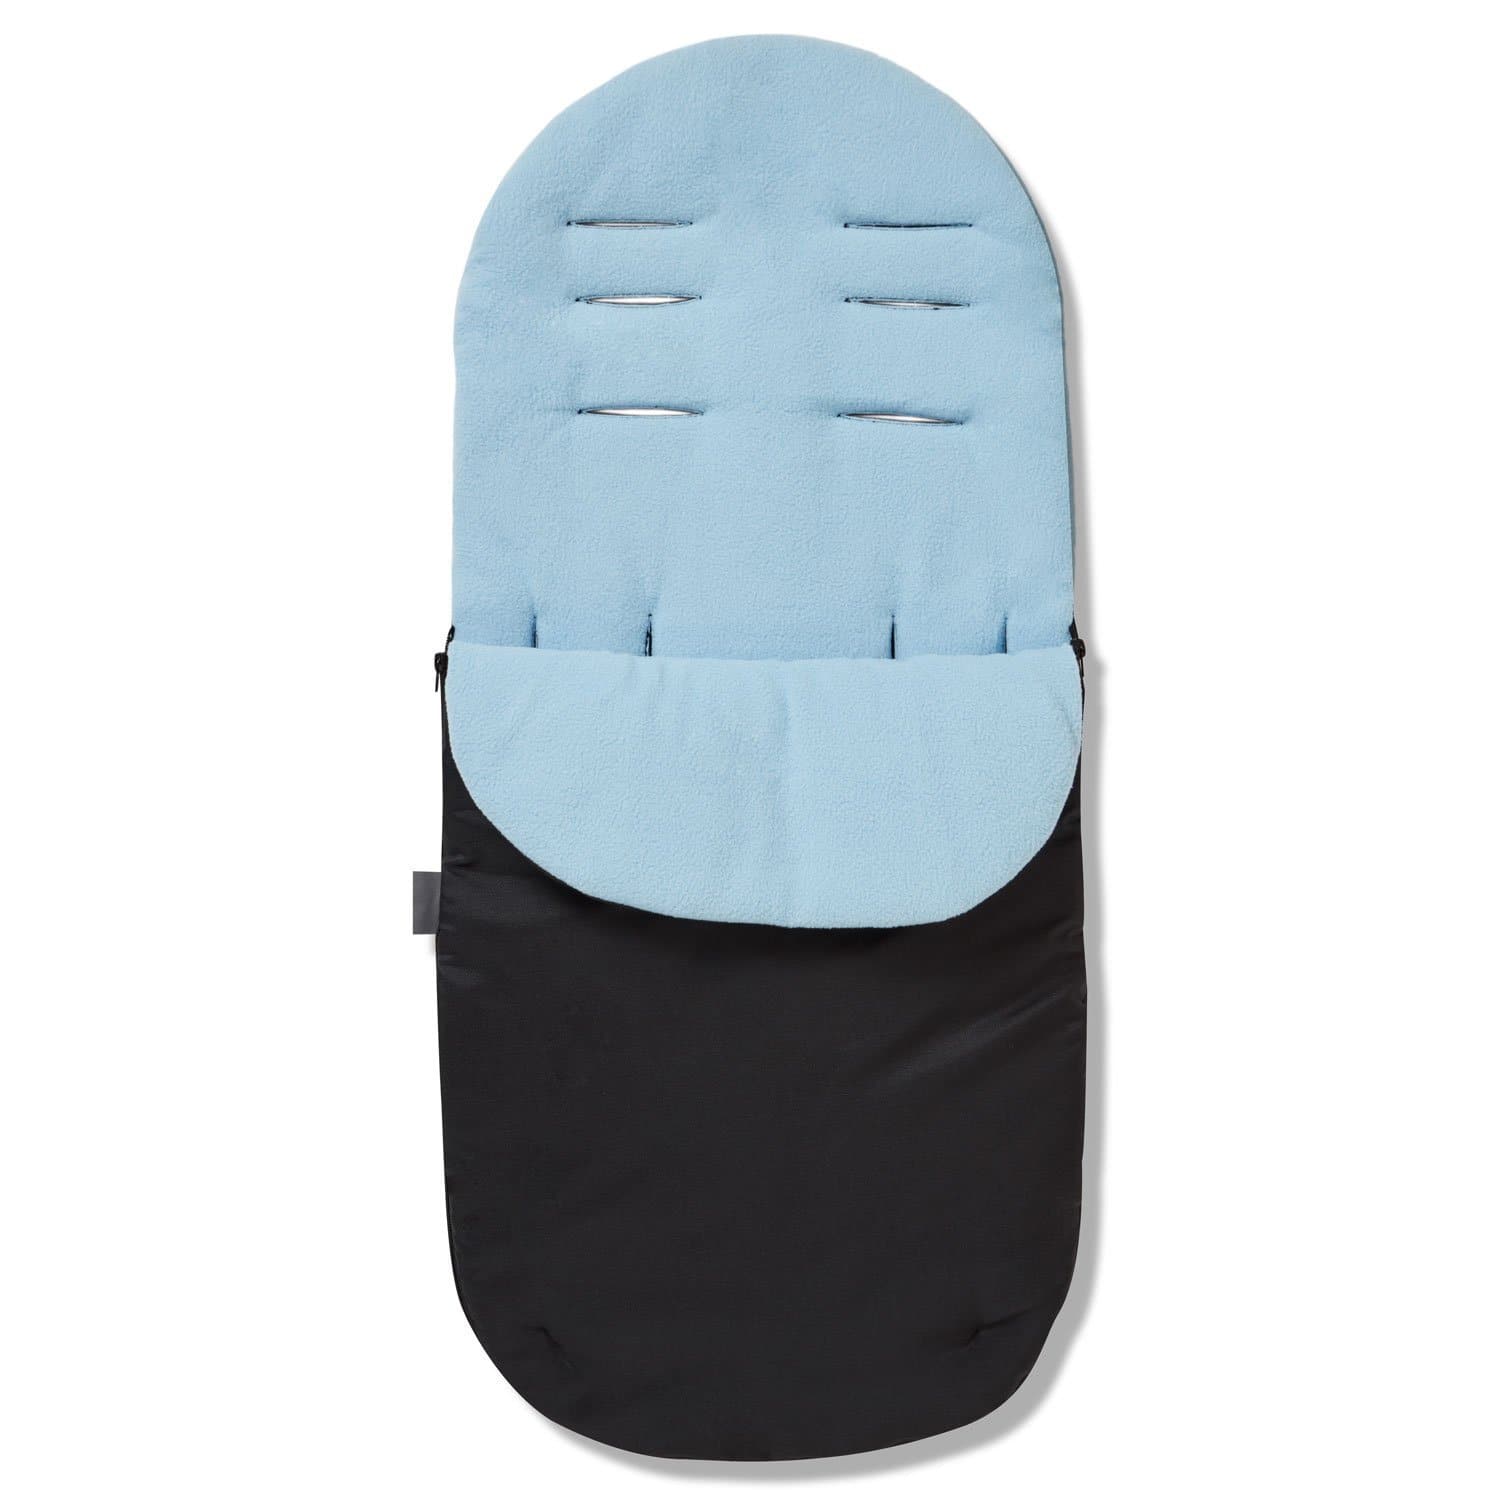 Footmuff / Cosy Toes Compatible with BabySun - Light Blue / Fits All Models | For Your Little One